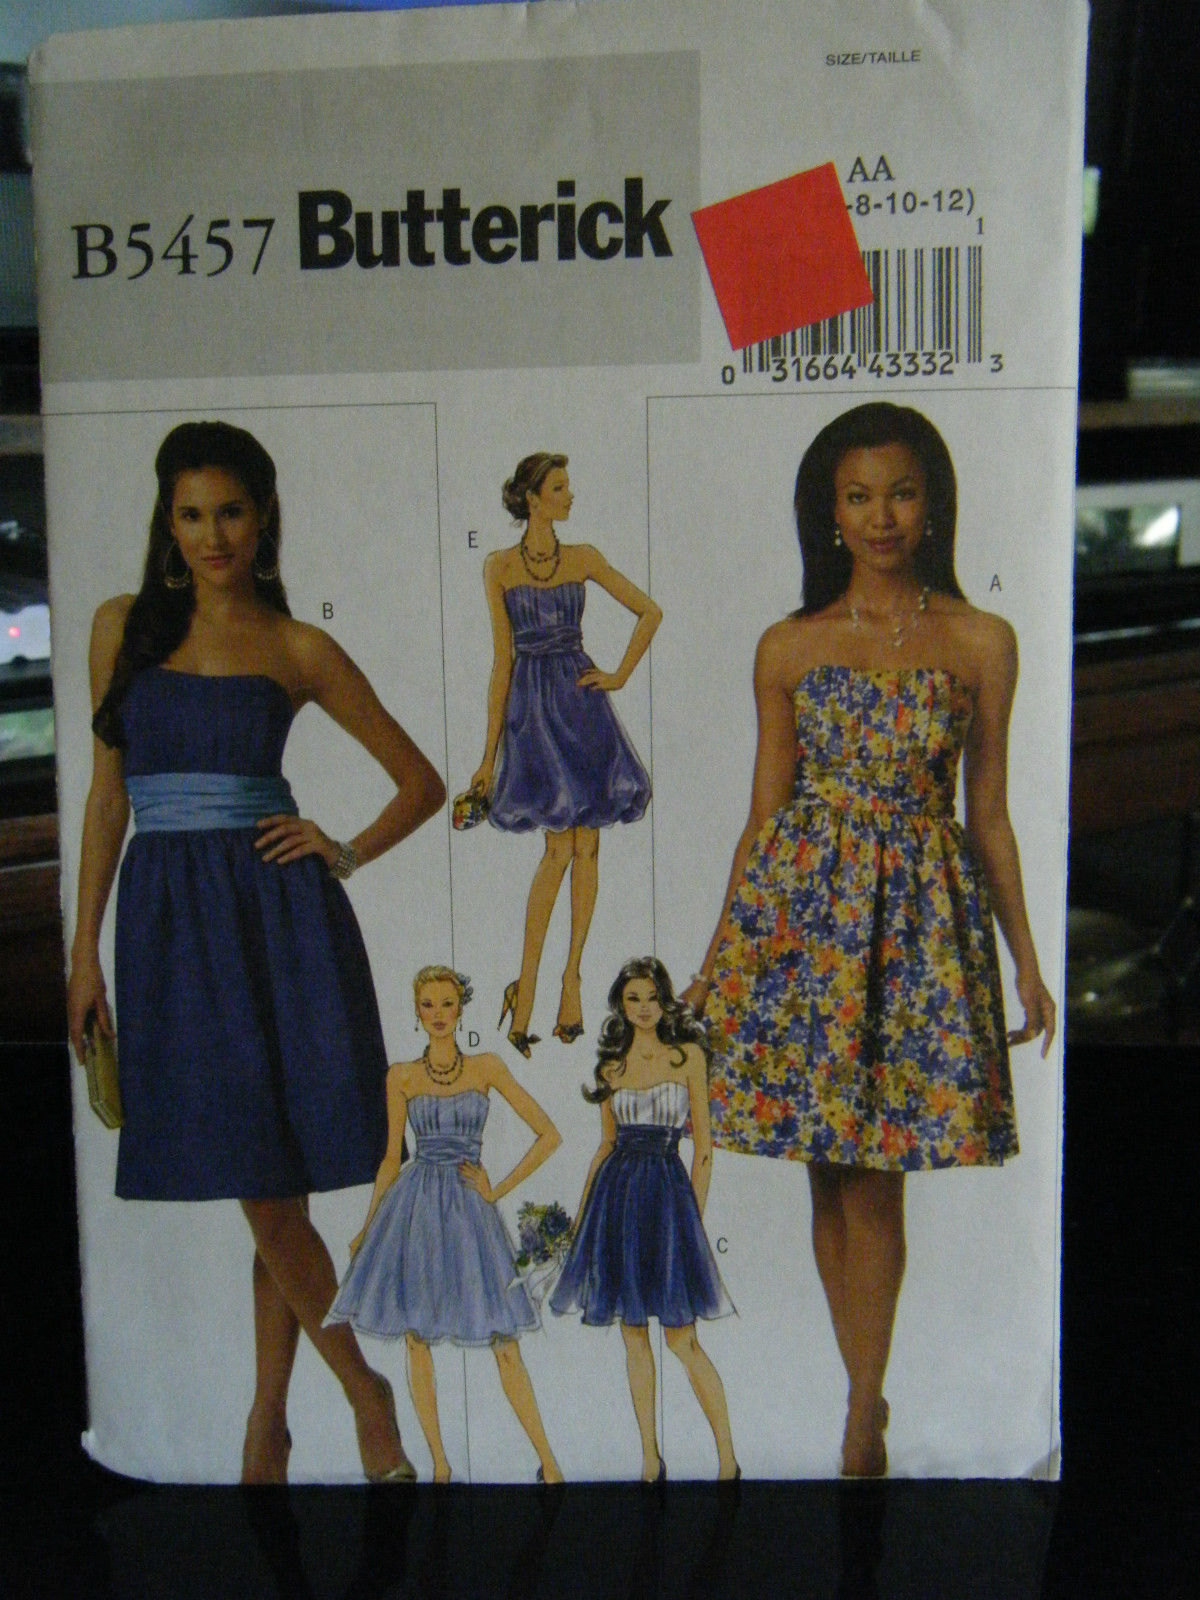 Primary image for Butterick B5457 Misses Cocktail Party Strapless Dress Pattern - Size 6/8/10/12